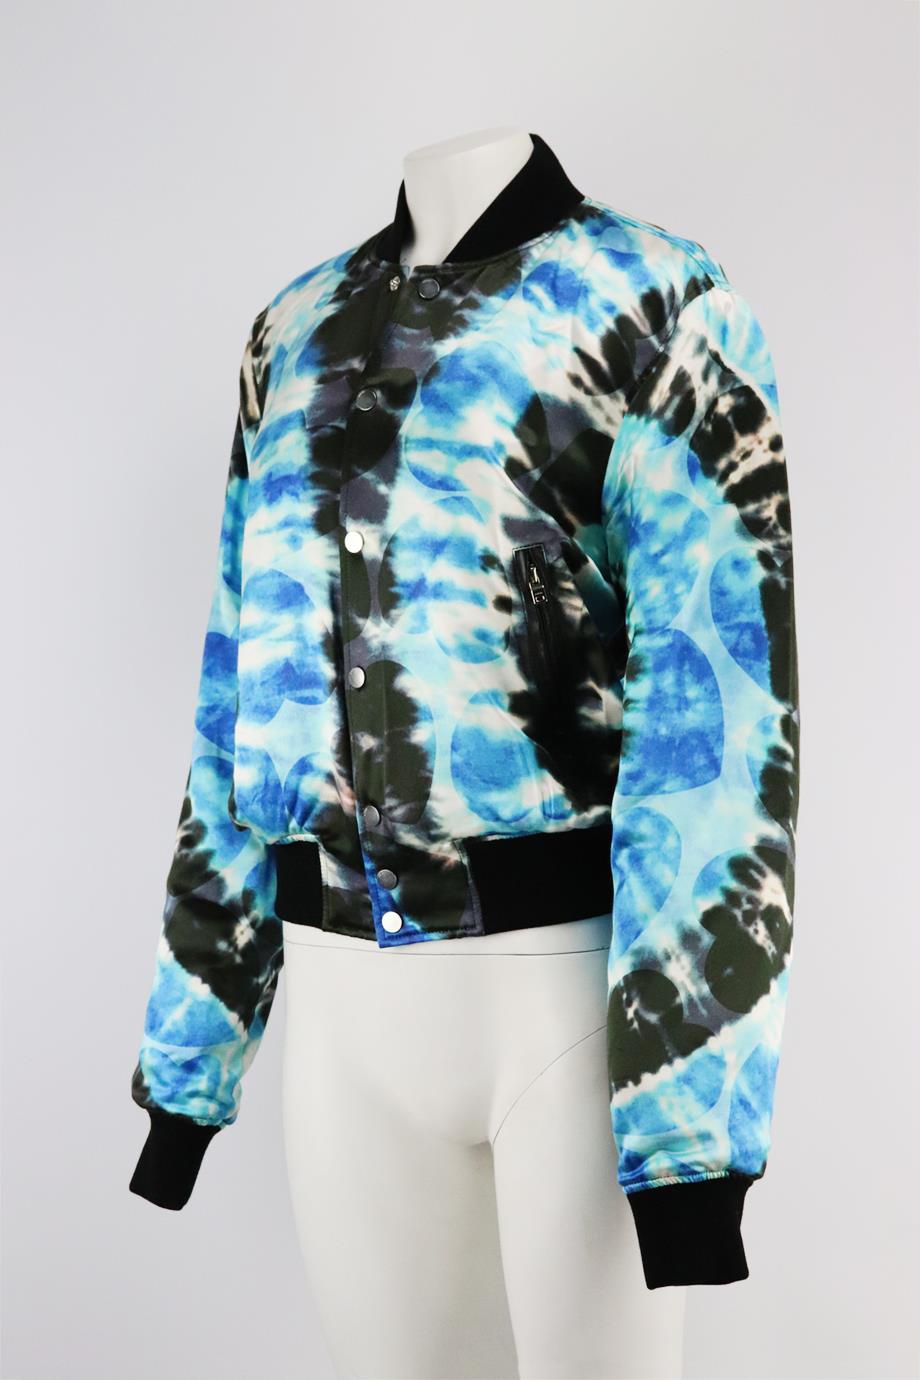 AMIRI PRINTED TIE DYED SILK BLEND BOMBER JACKET SMALL